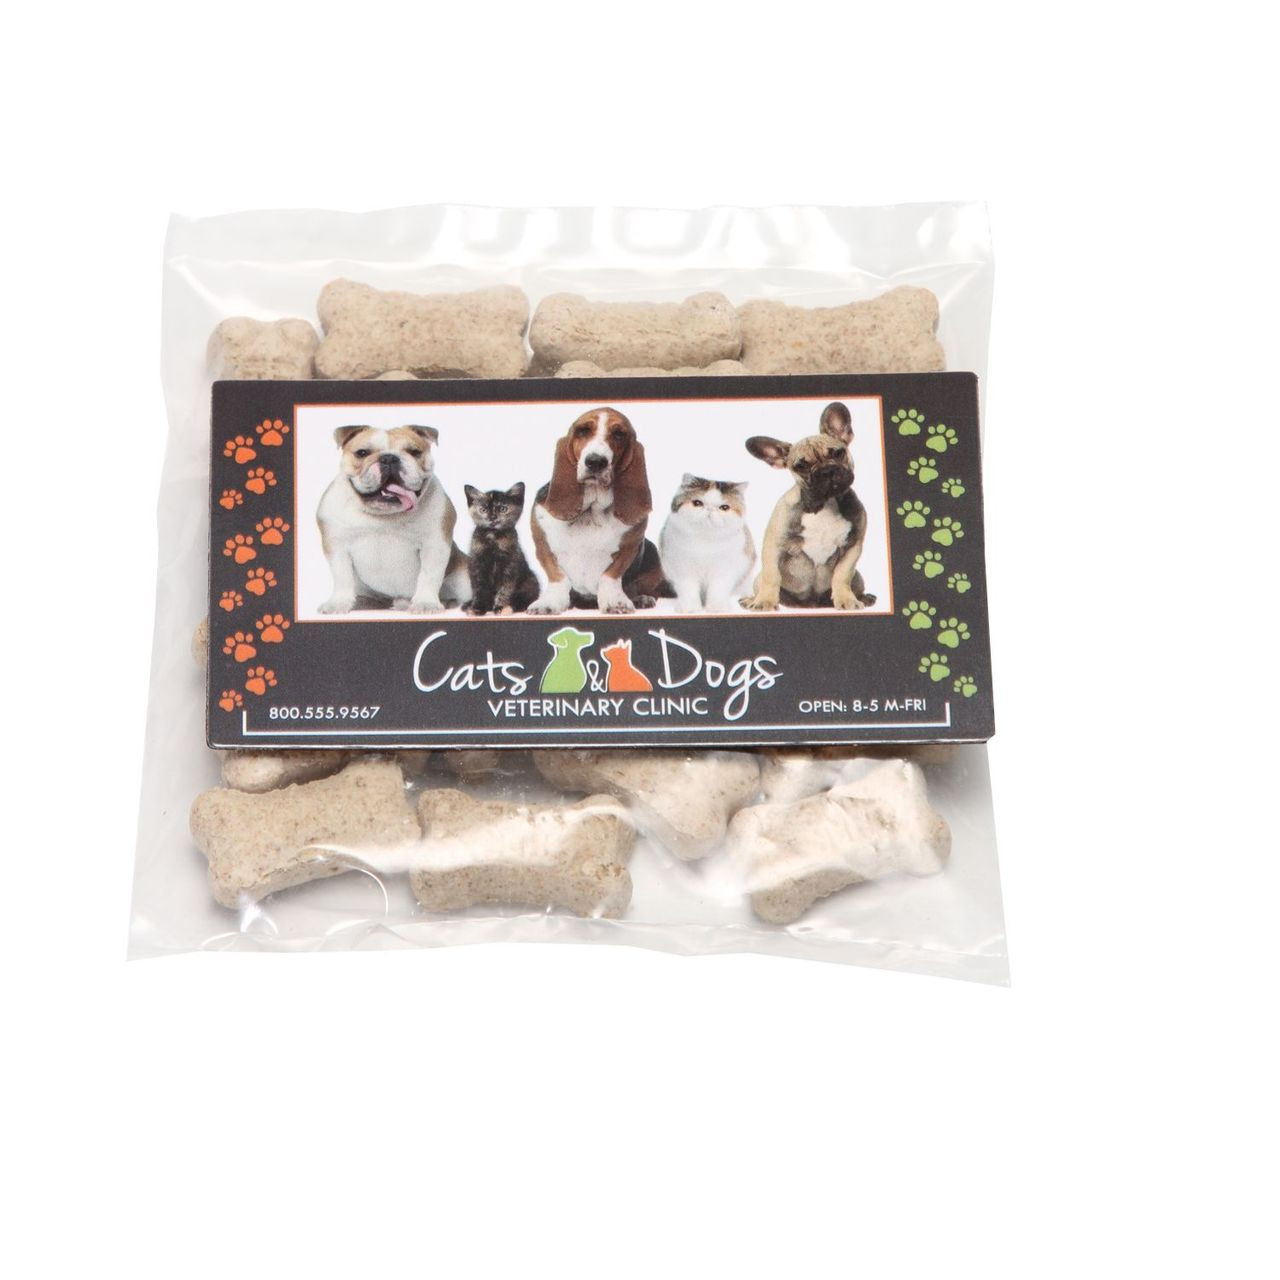 how big is the retail dog treat business